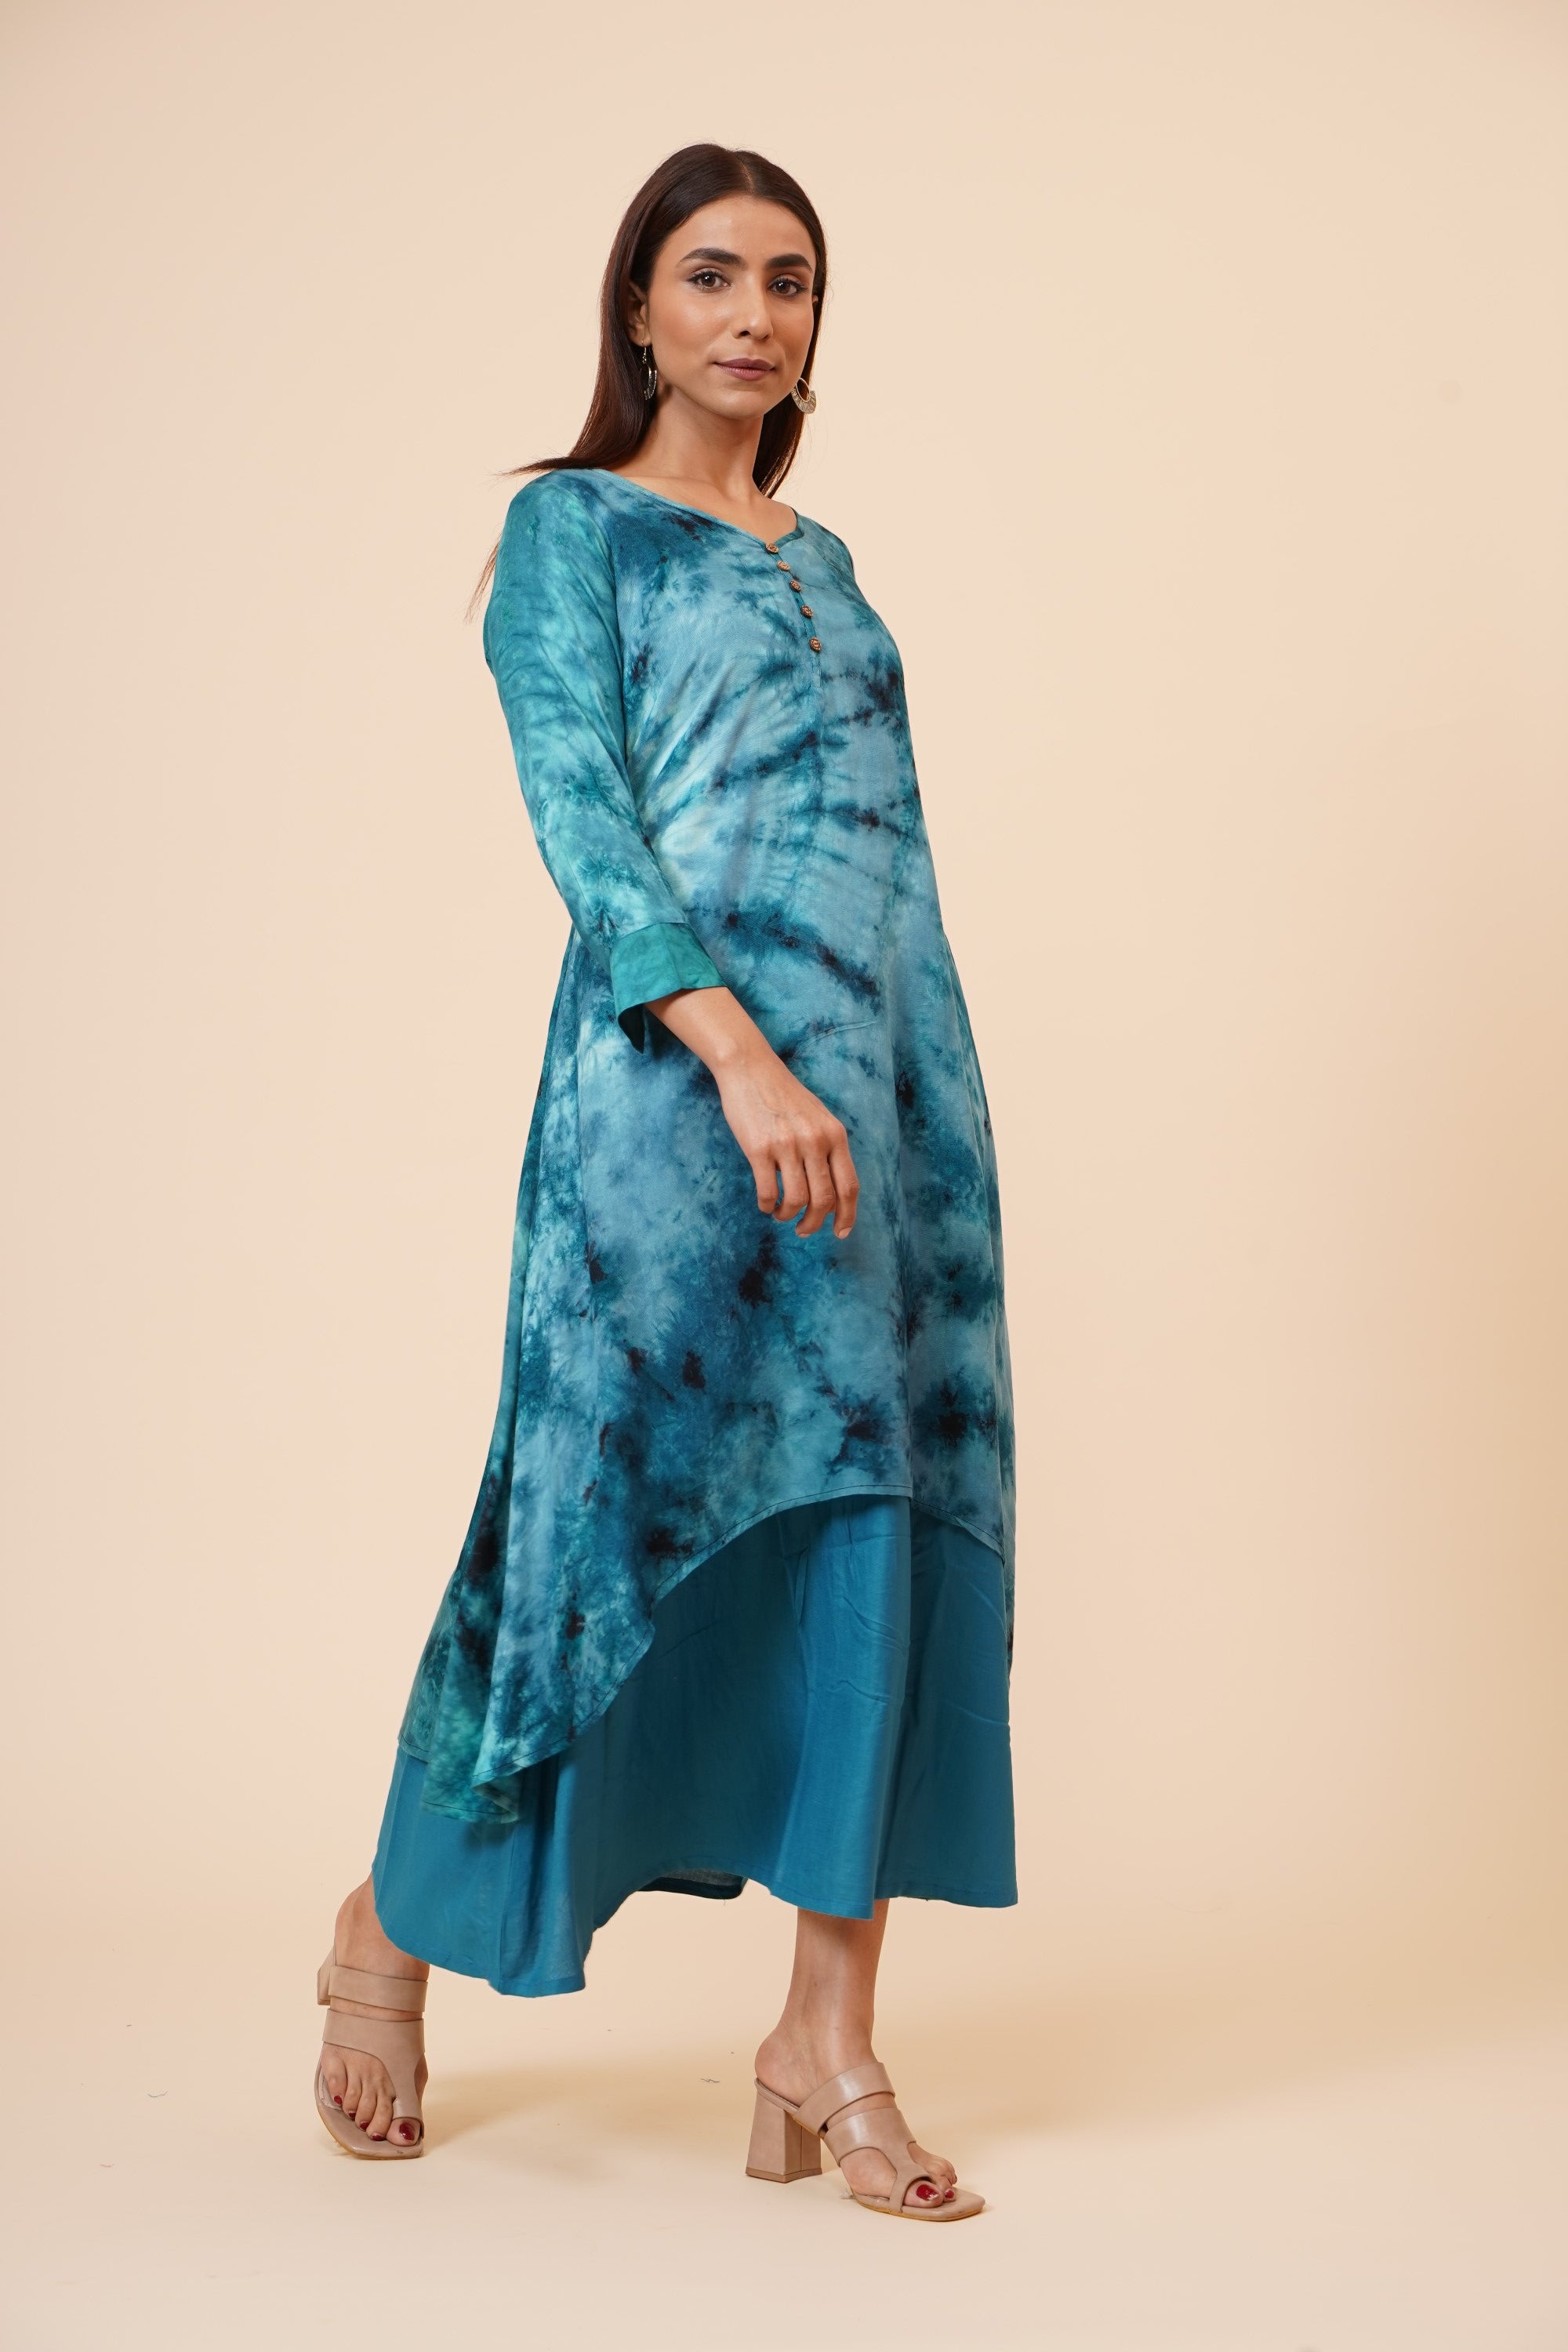 Women's Indian Tie N Dye Kurti With Wooden Button Placket And Cuff - MIRACOLOS by Ruchi